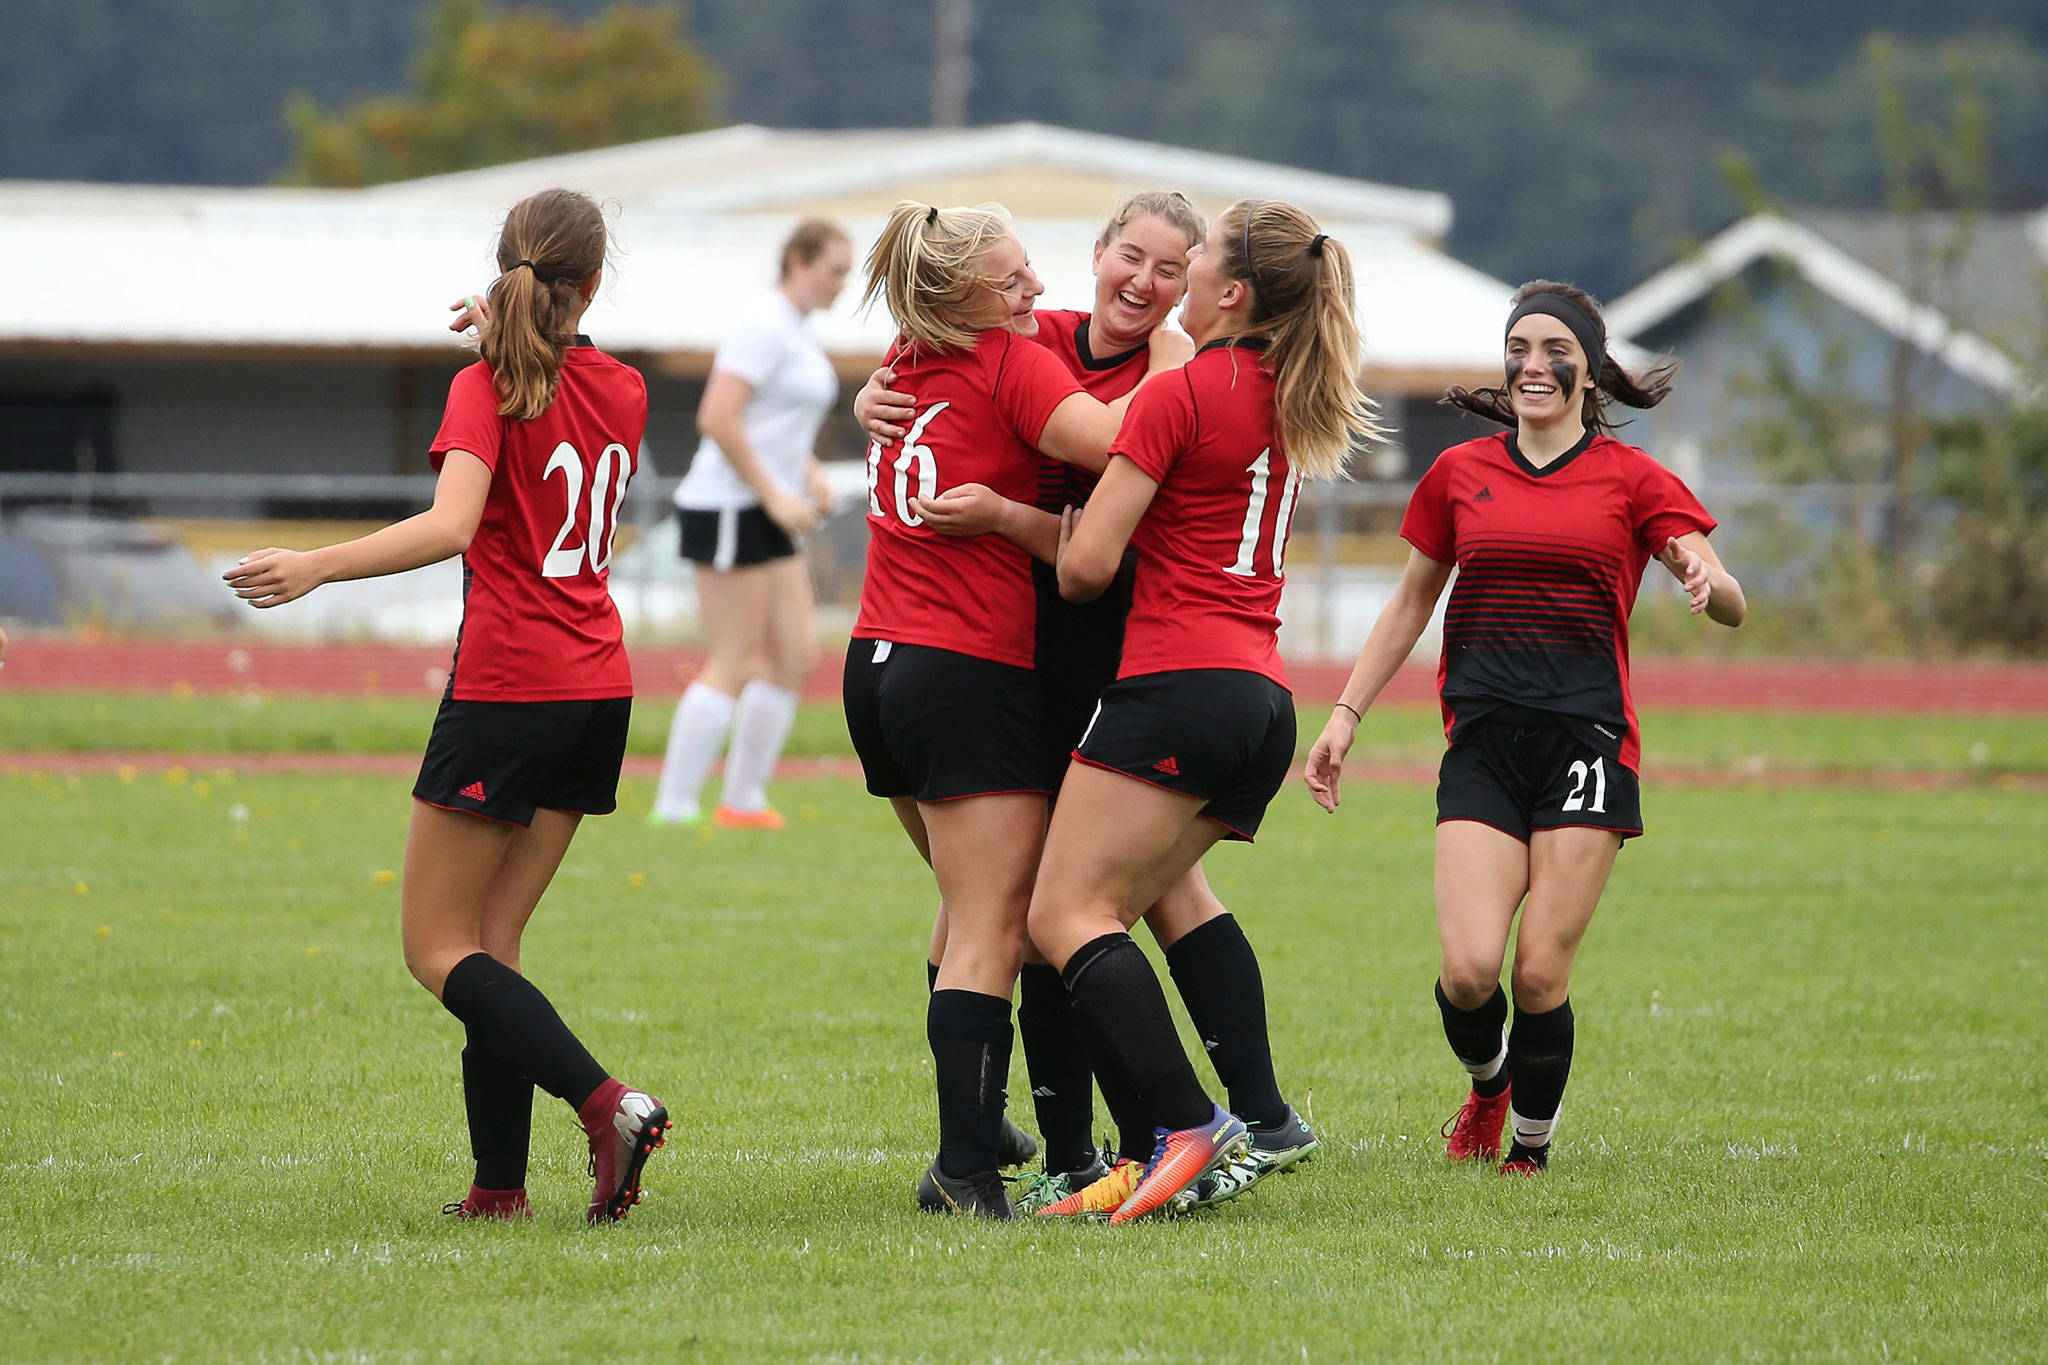 Coupeville’s Avalon Renninger (16) celebrates with her teammates after scoring for the Wolves. (Photo by John Fisken)